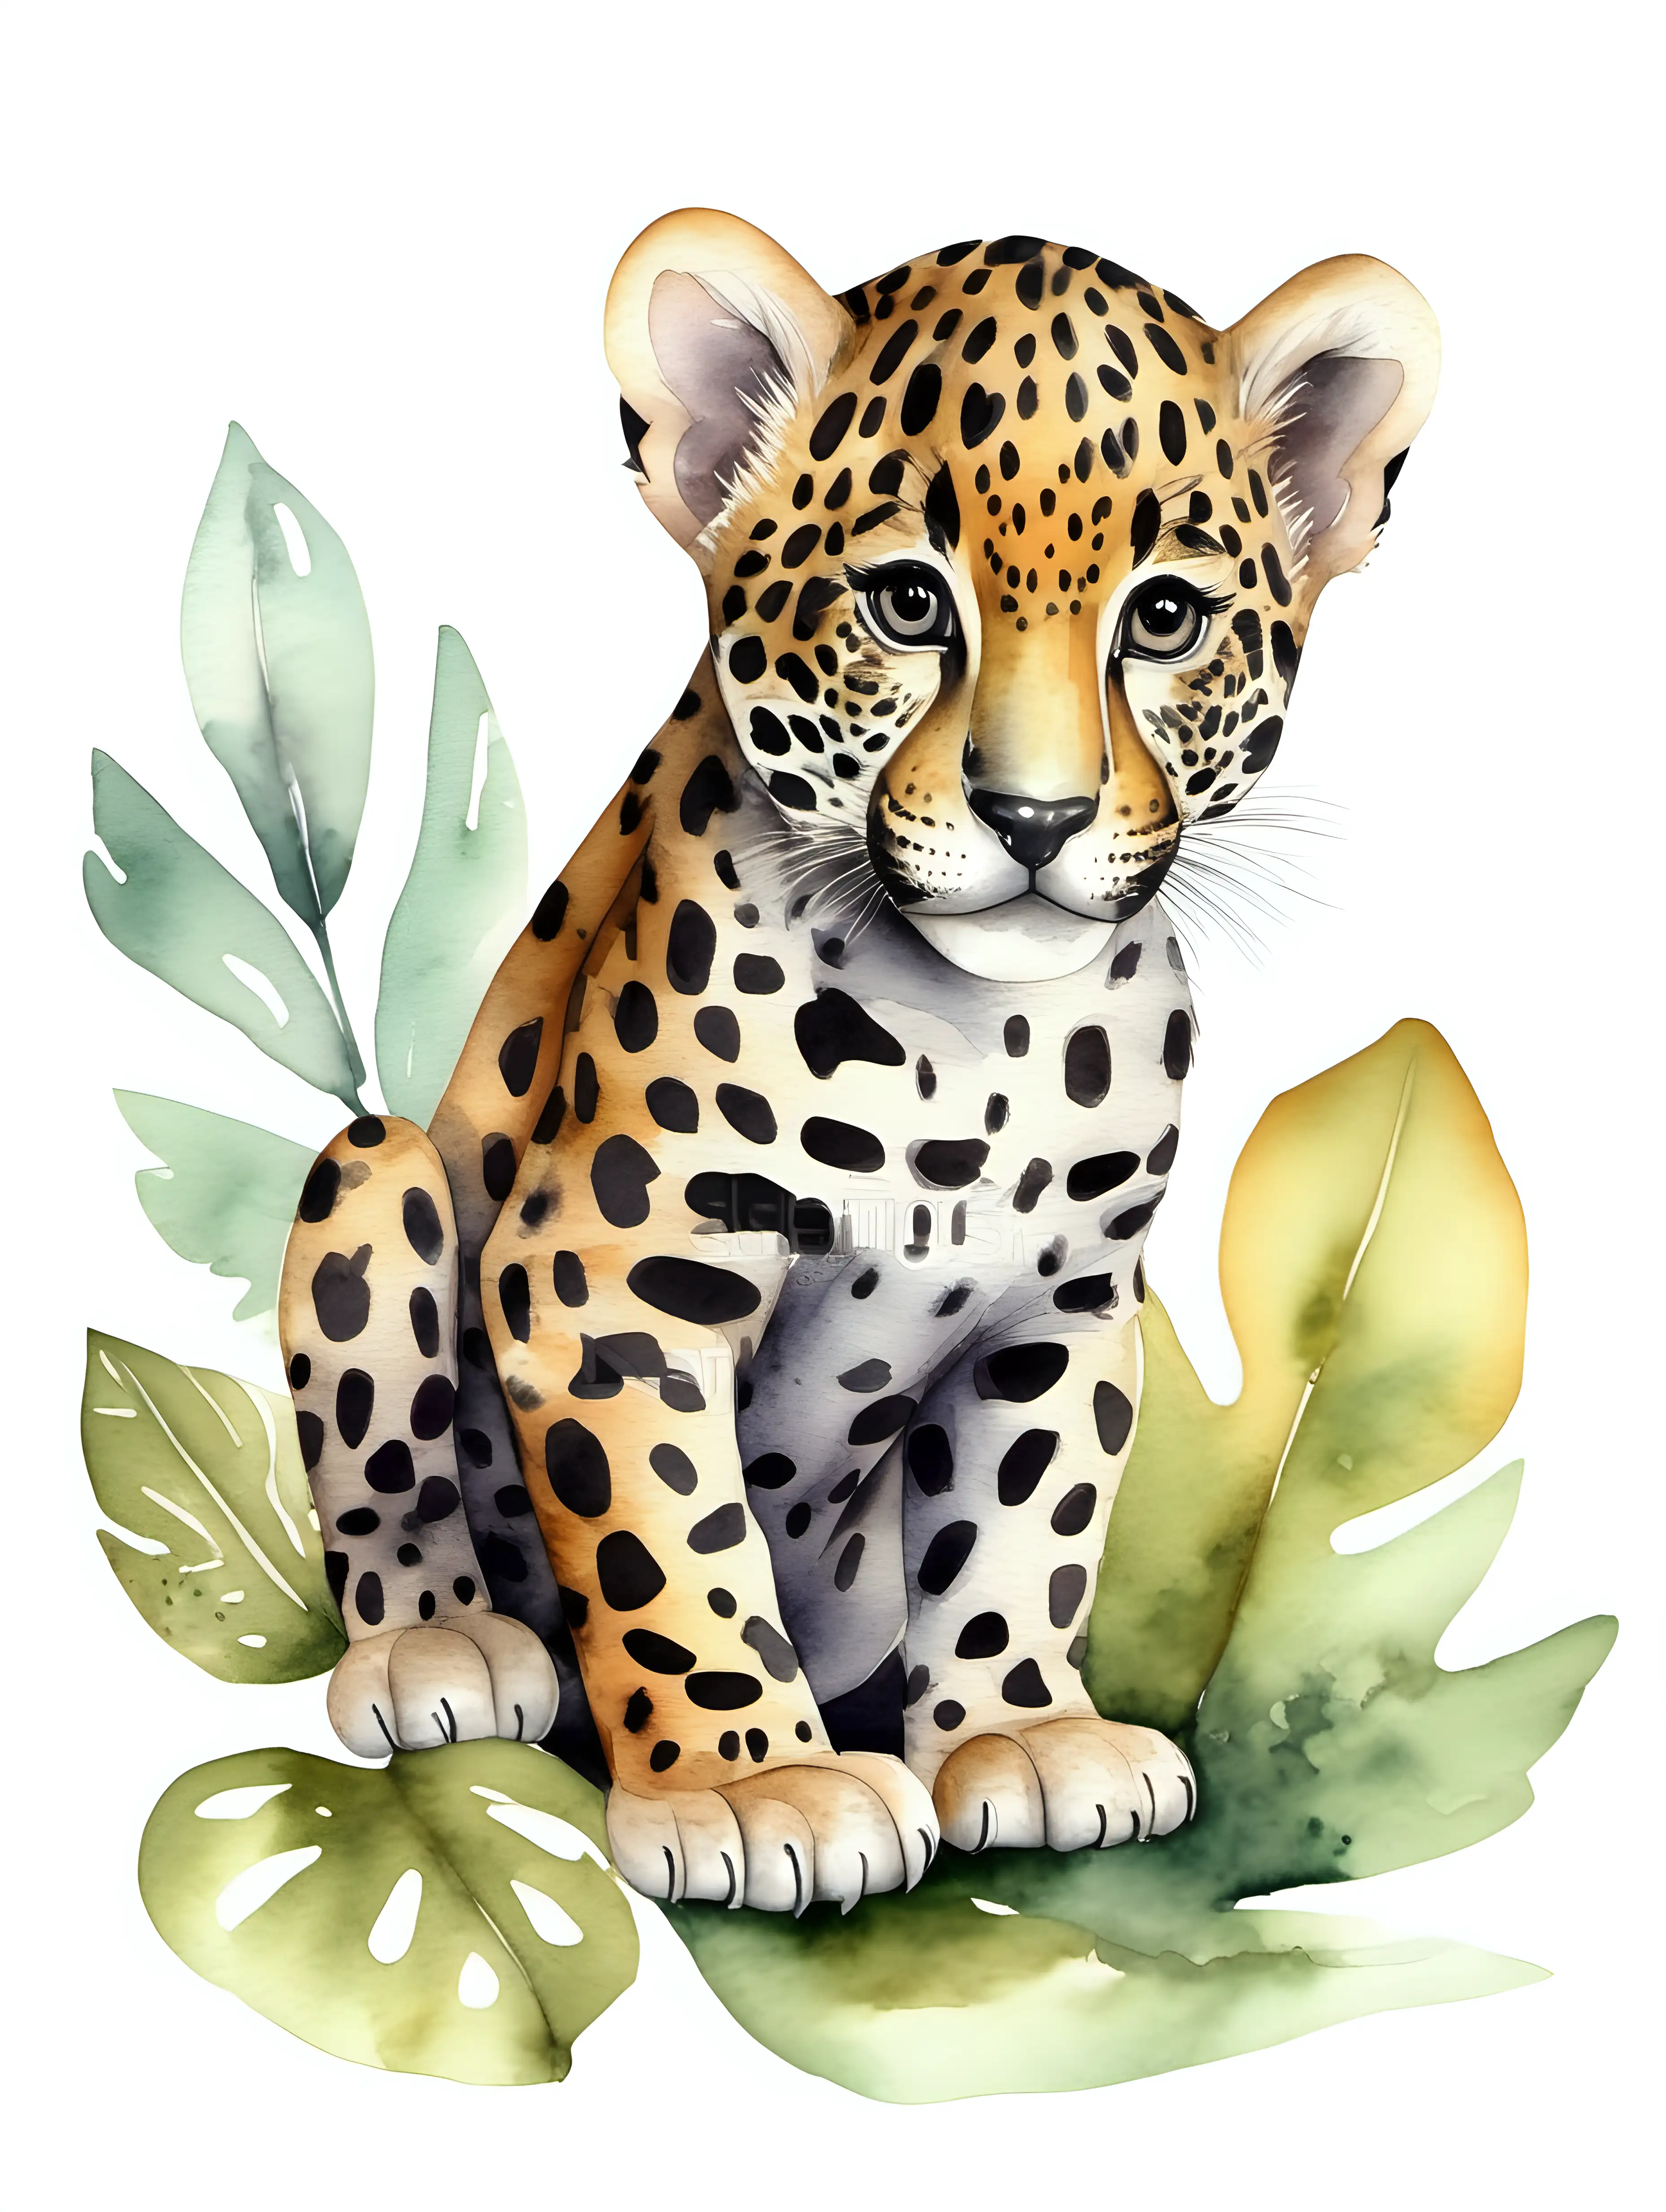 cute baby jaguar, watercolour drawing, woodland style.
Isolated white background